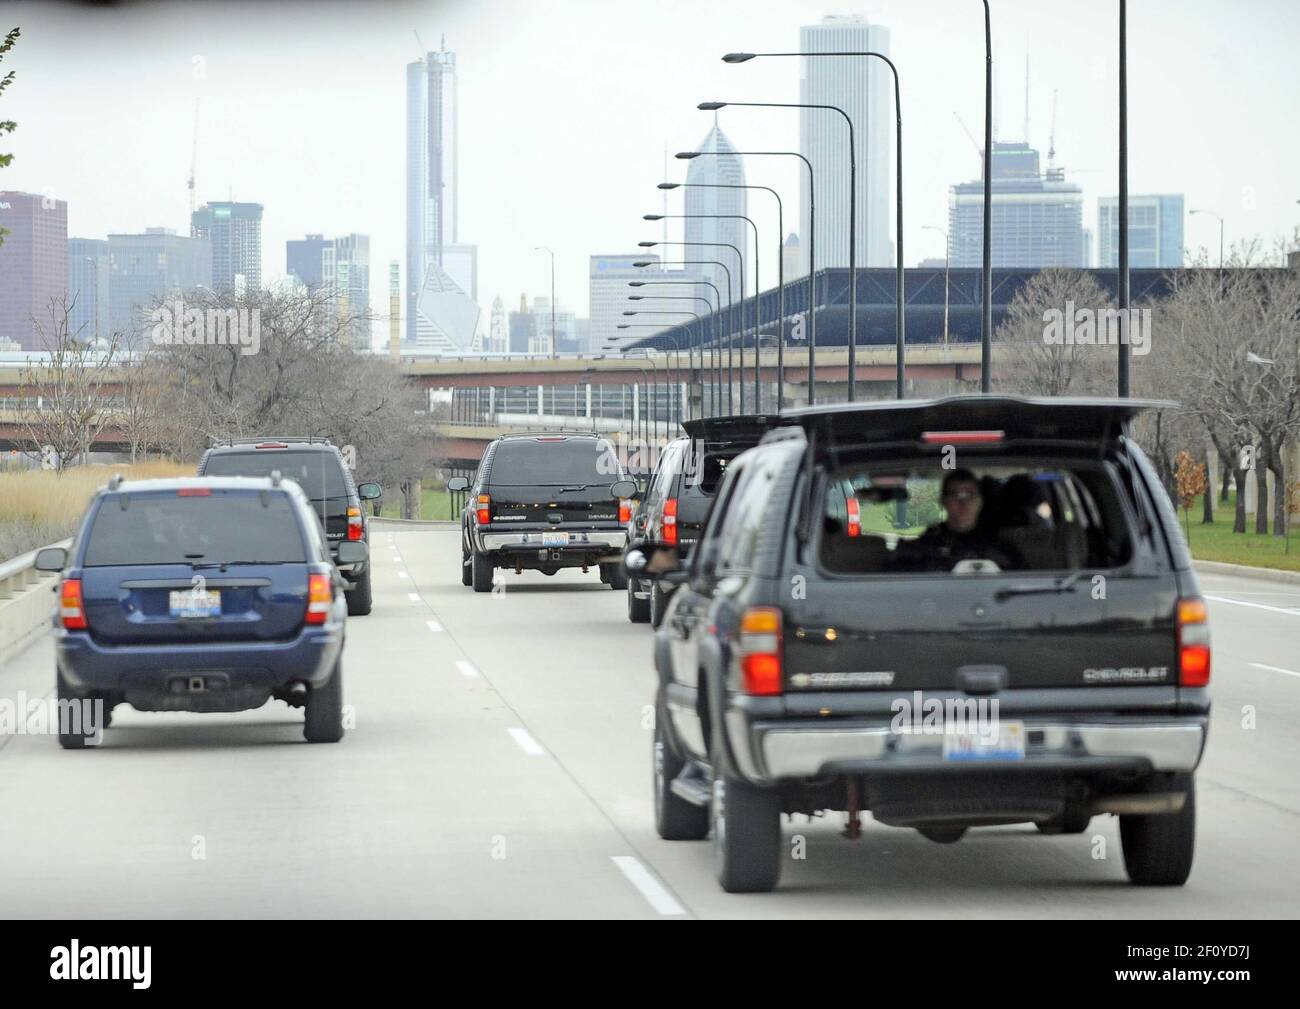 20 November 2008 - Chicago, Illinois - US President elect Barack Obama rides in his motorcade to his transition office in Chicago, Illinois, USA 20 November2009. Obama will be inaugurated on 20 January 2009 as the 44th president. Photo Credit: Tannen Maury/Pool/Sipa Press/0811201858 Stock Photo